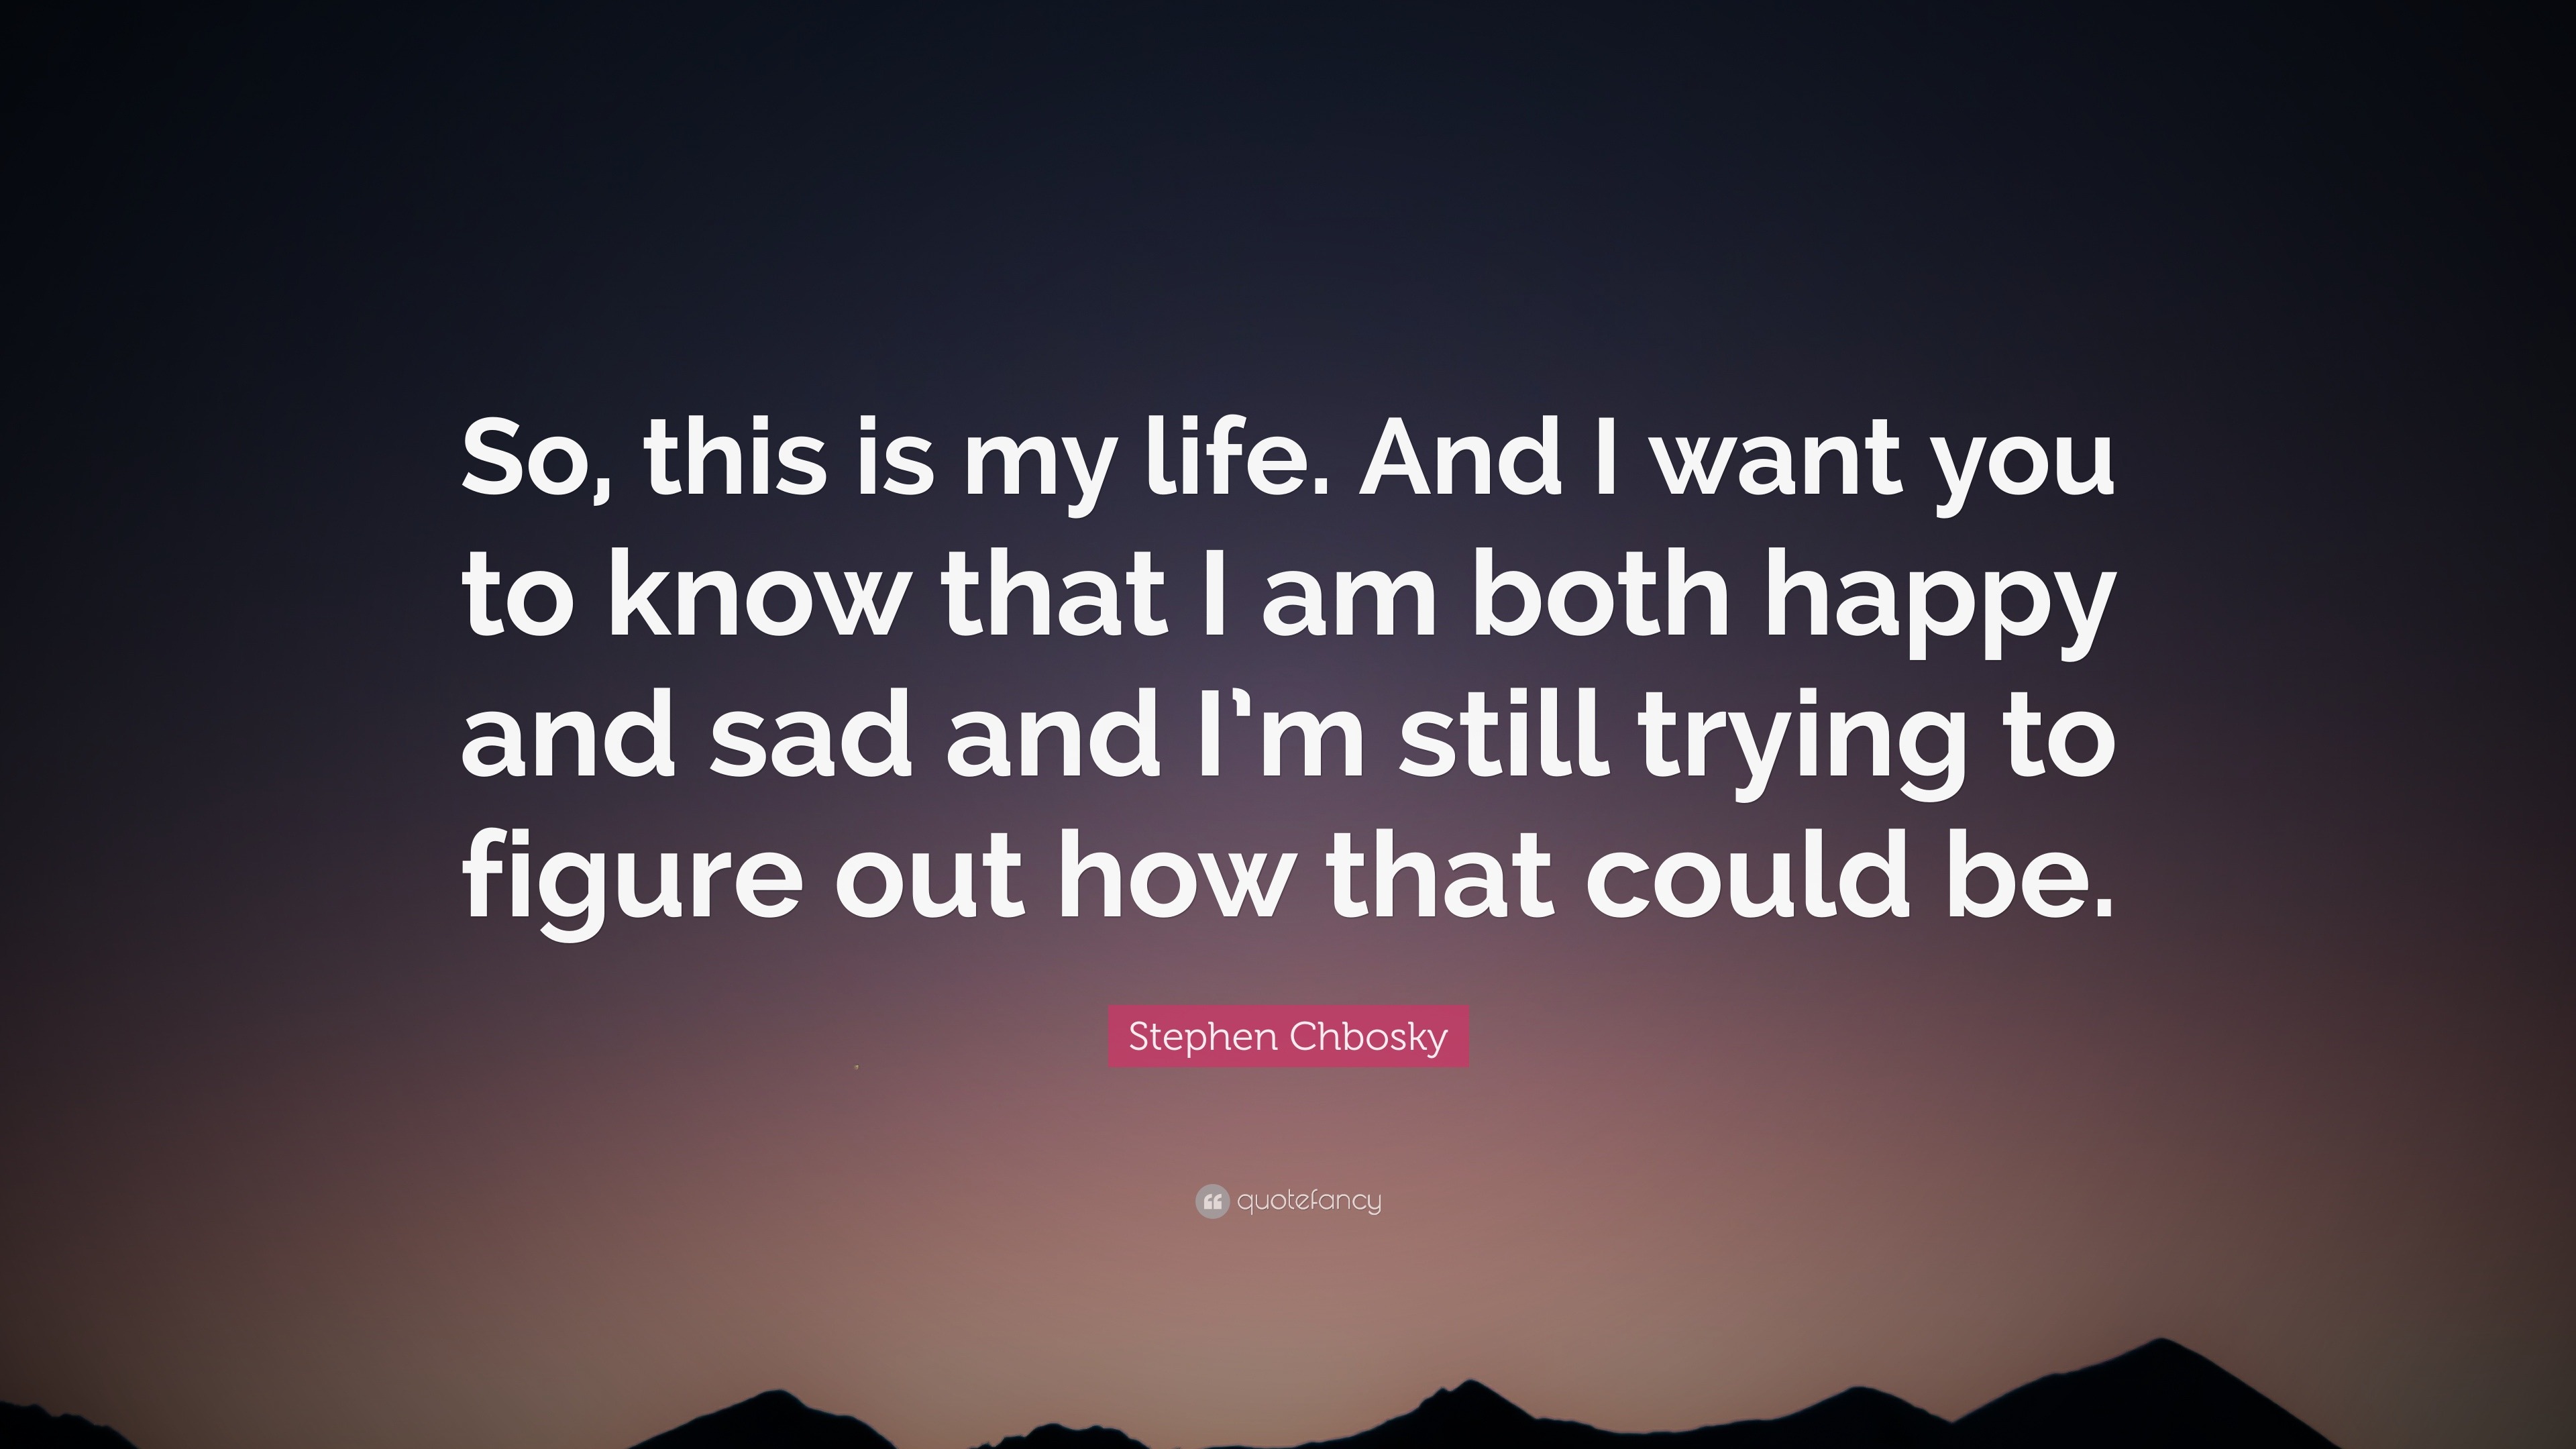 Stephen Chbosky Quote “So this is my life And I want you